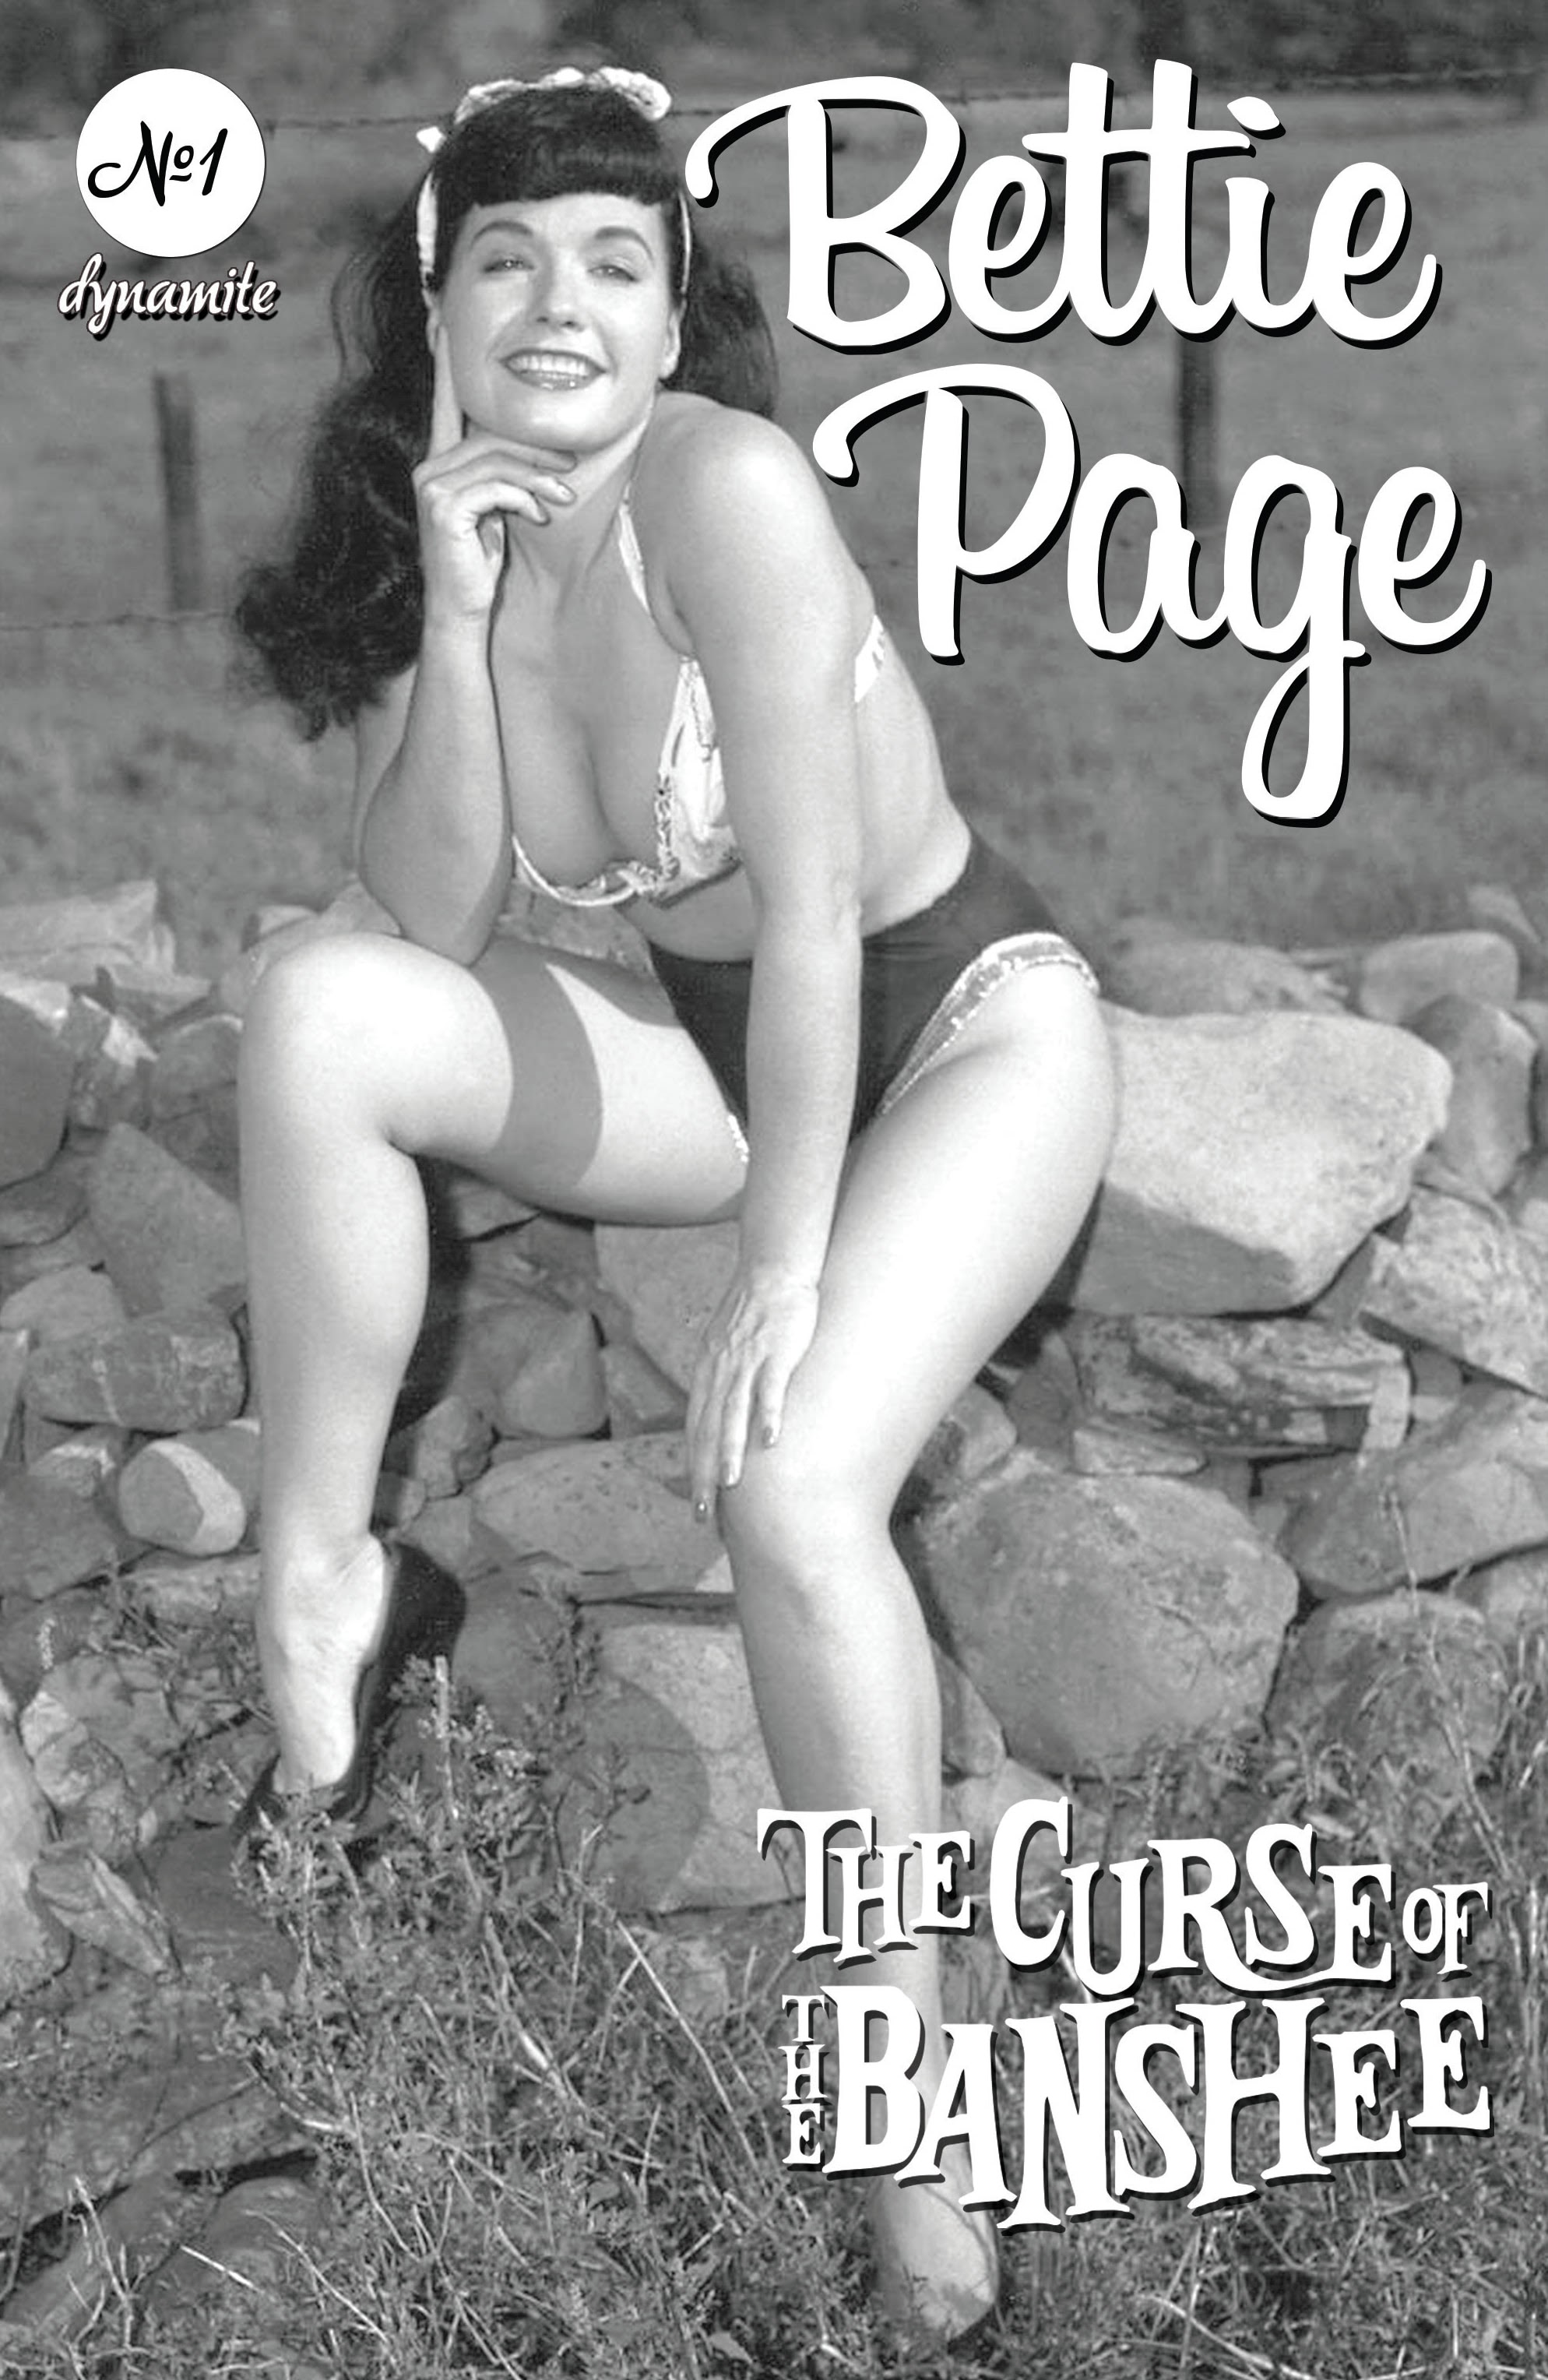 Read online Bettie Page & The Curse of the Banshee comic -  Issue #1 - 5